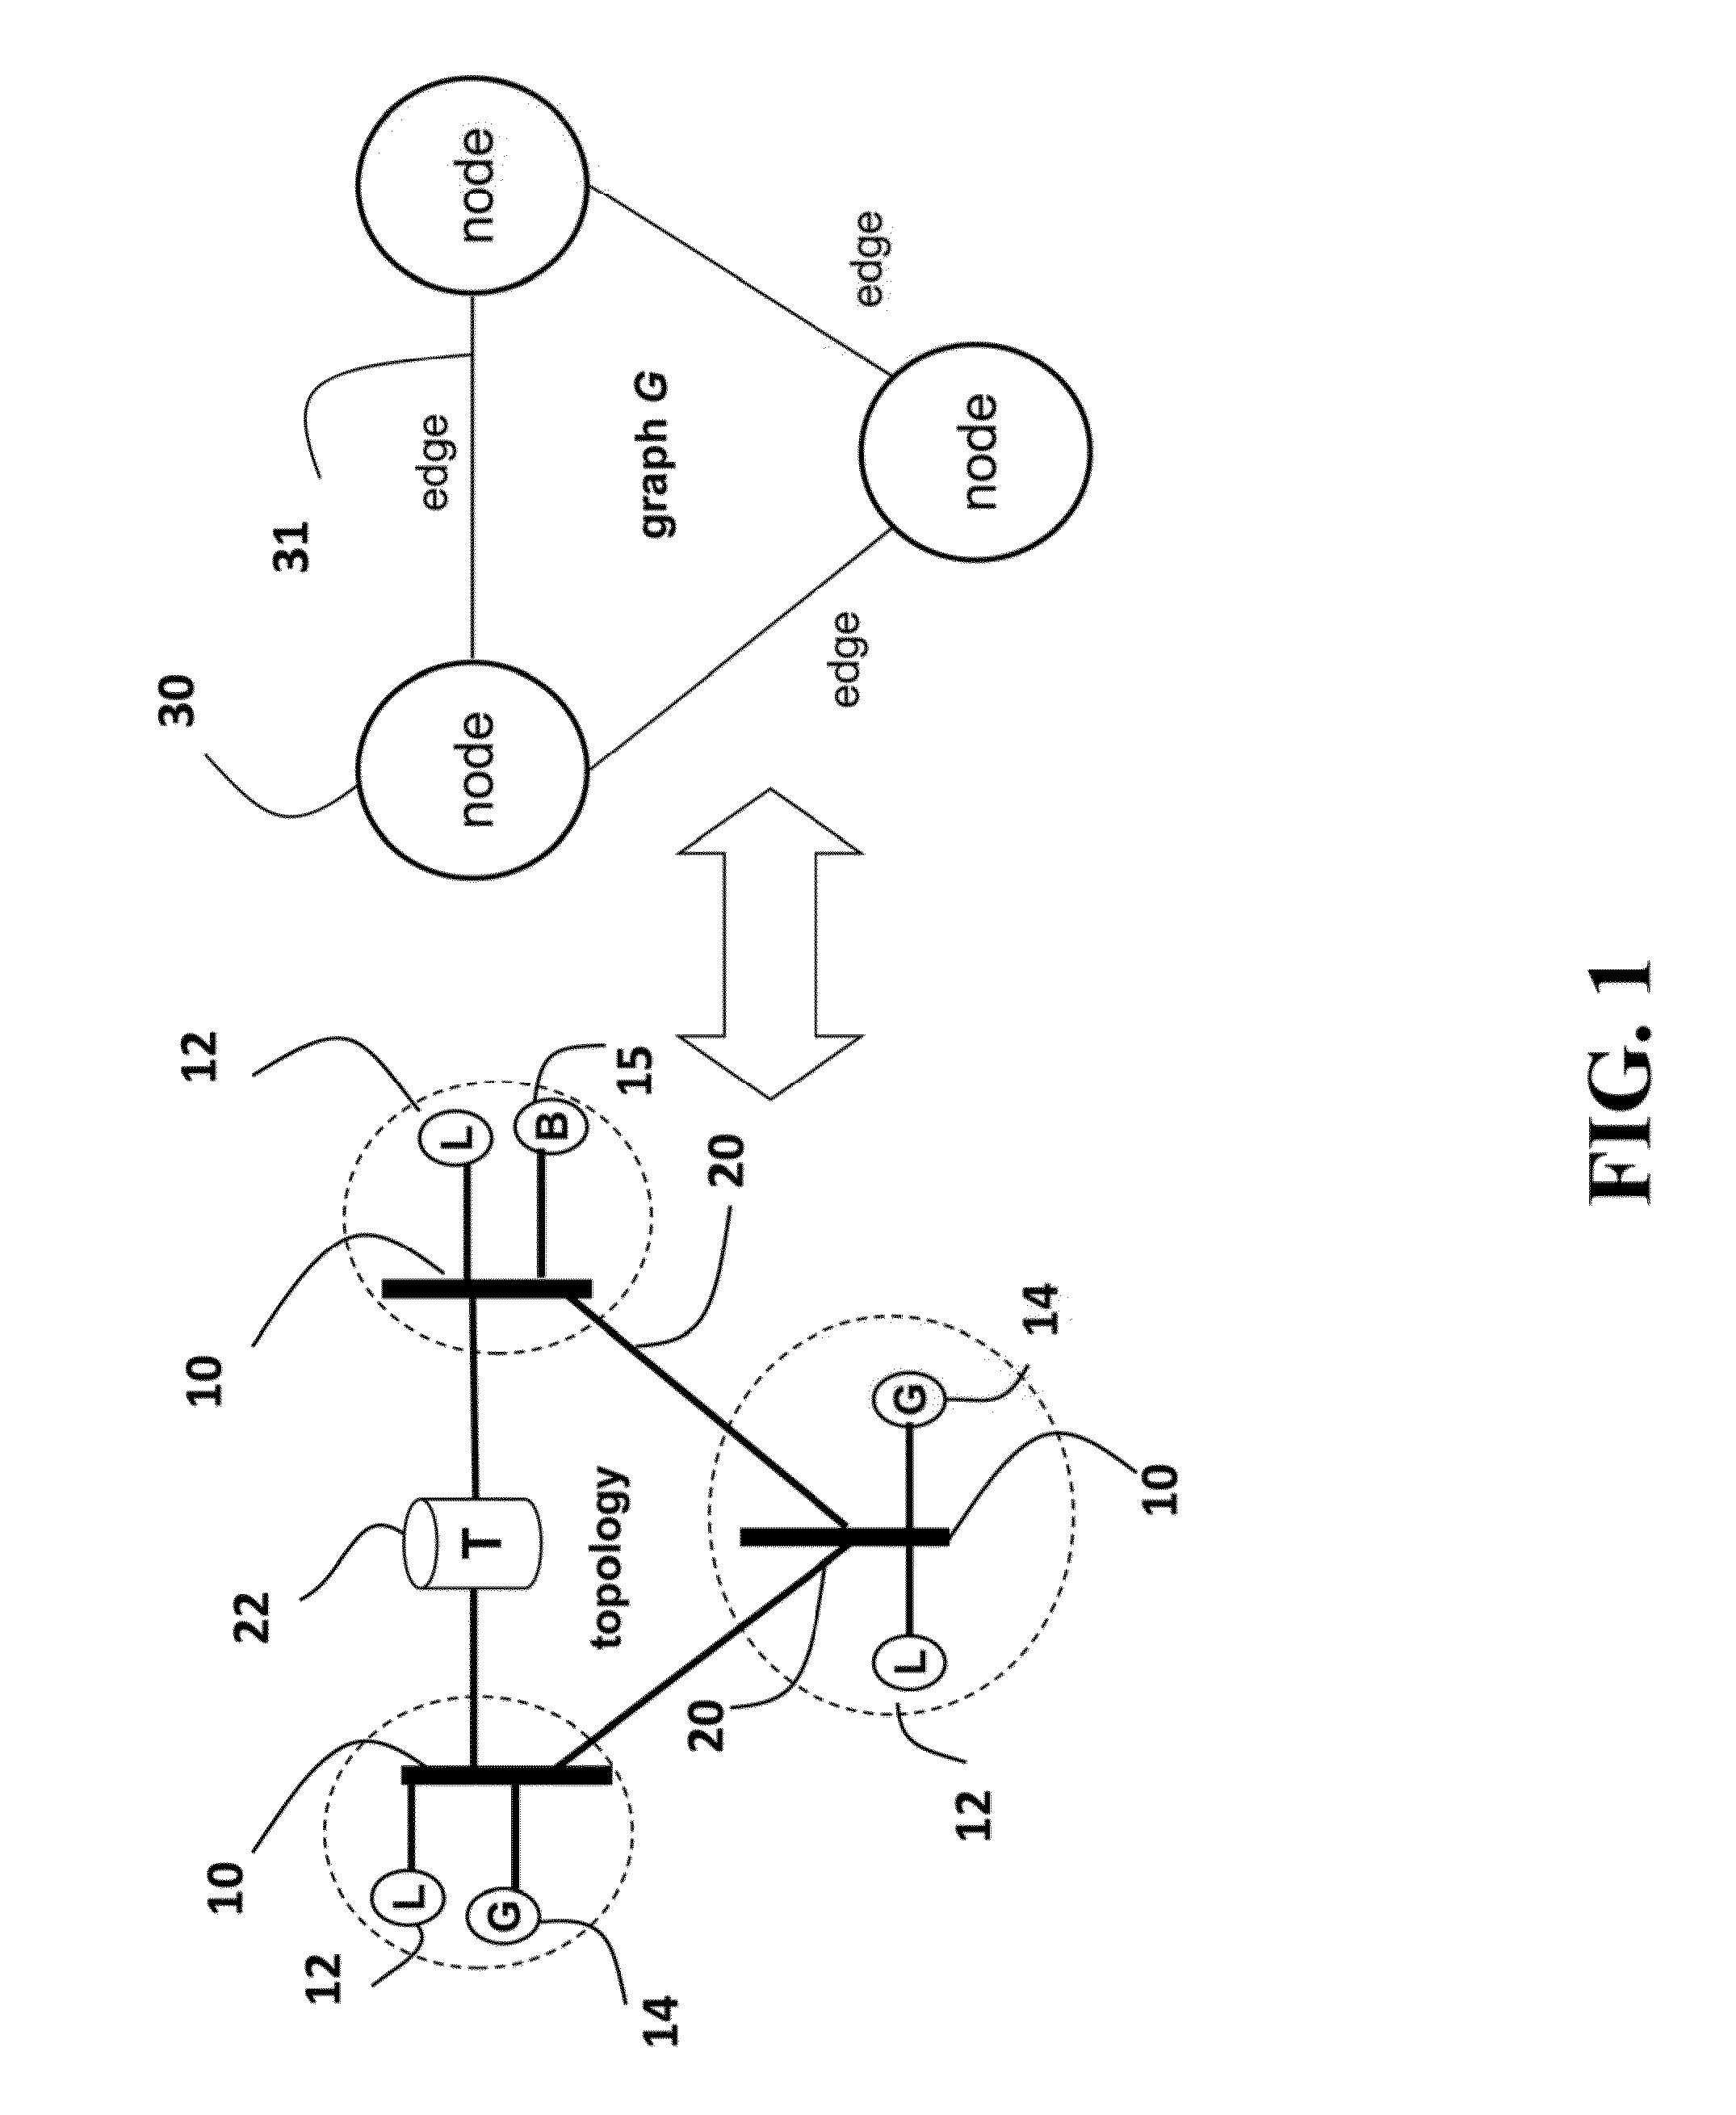 System and Method for Optimal Power Flow Analysis